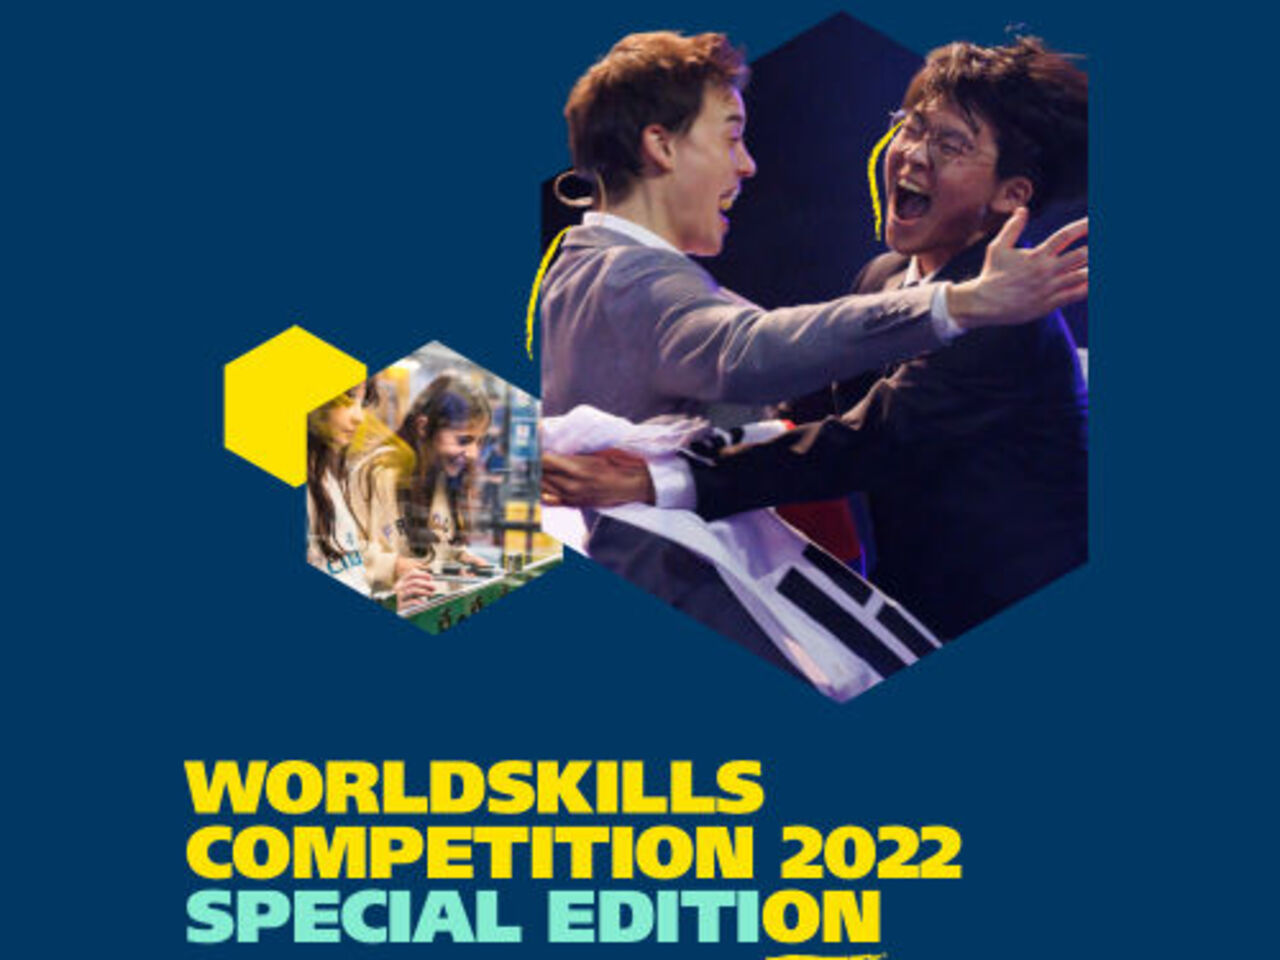 WorldSkills Competition 2022 Special Edition Impact Report published